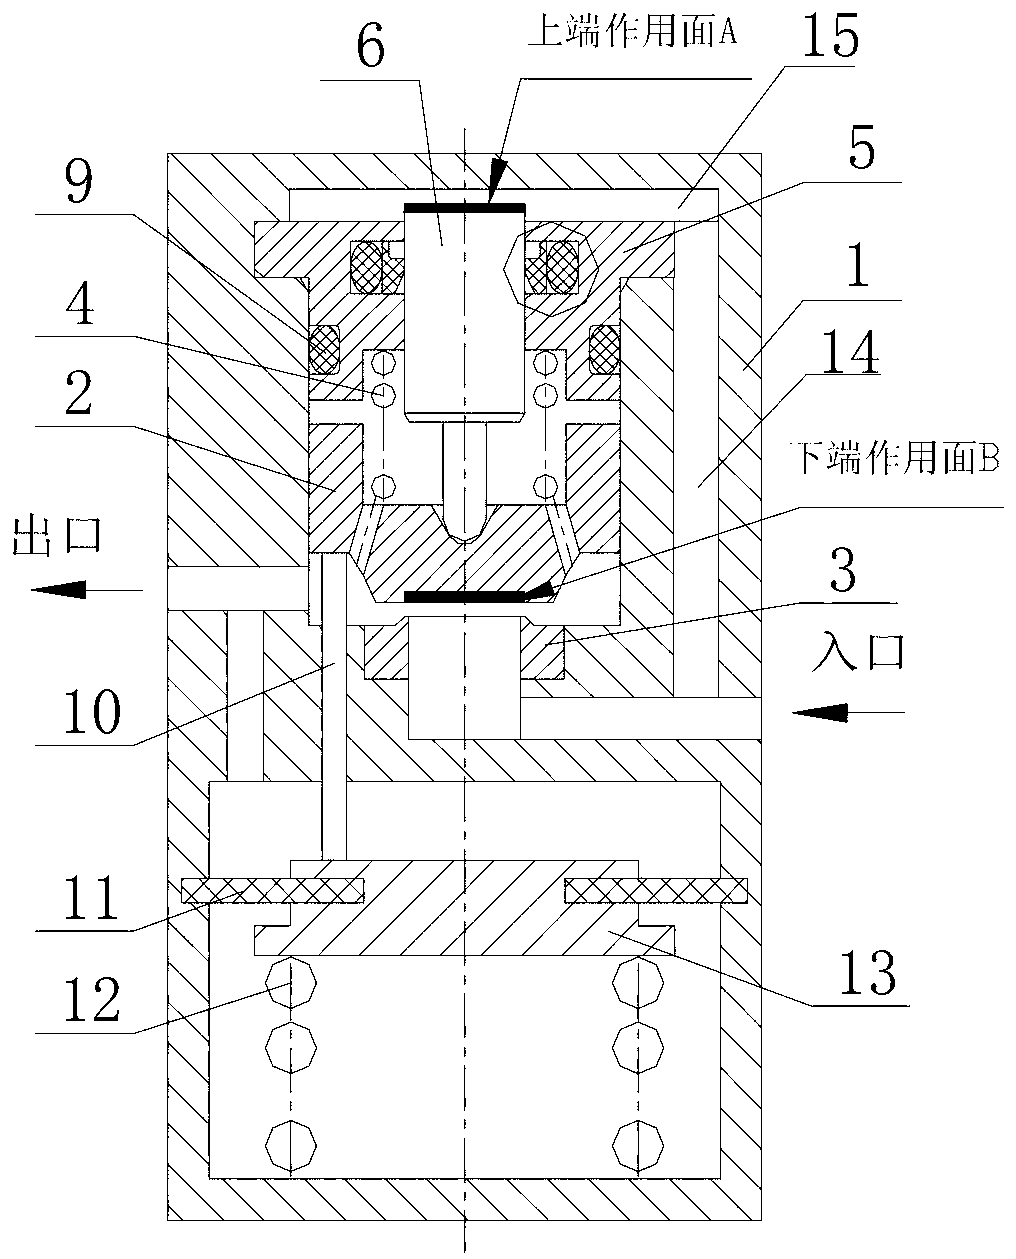 Forward low-friction unloading gear for reducing valve and reducing valve